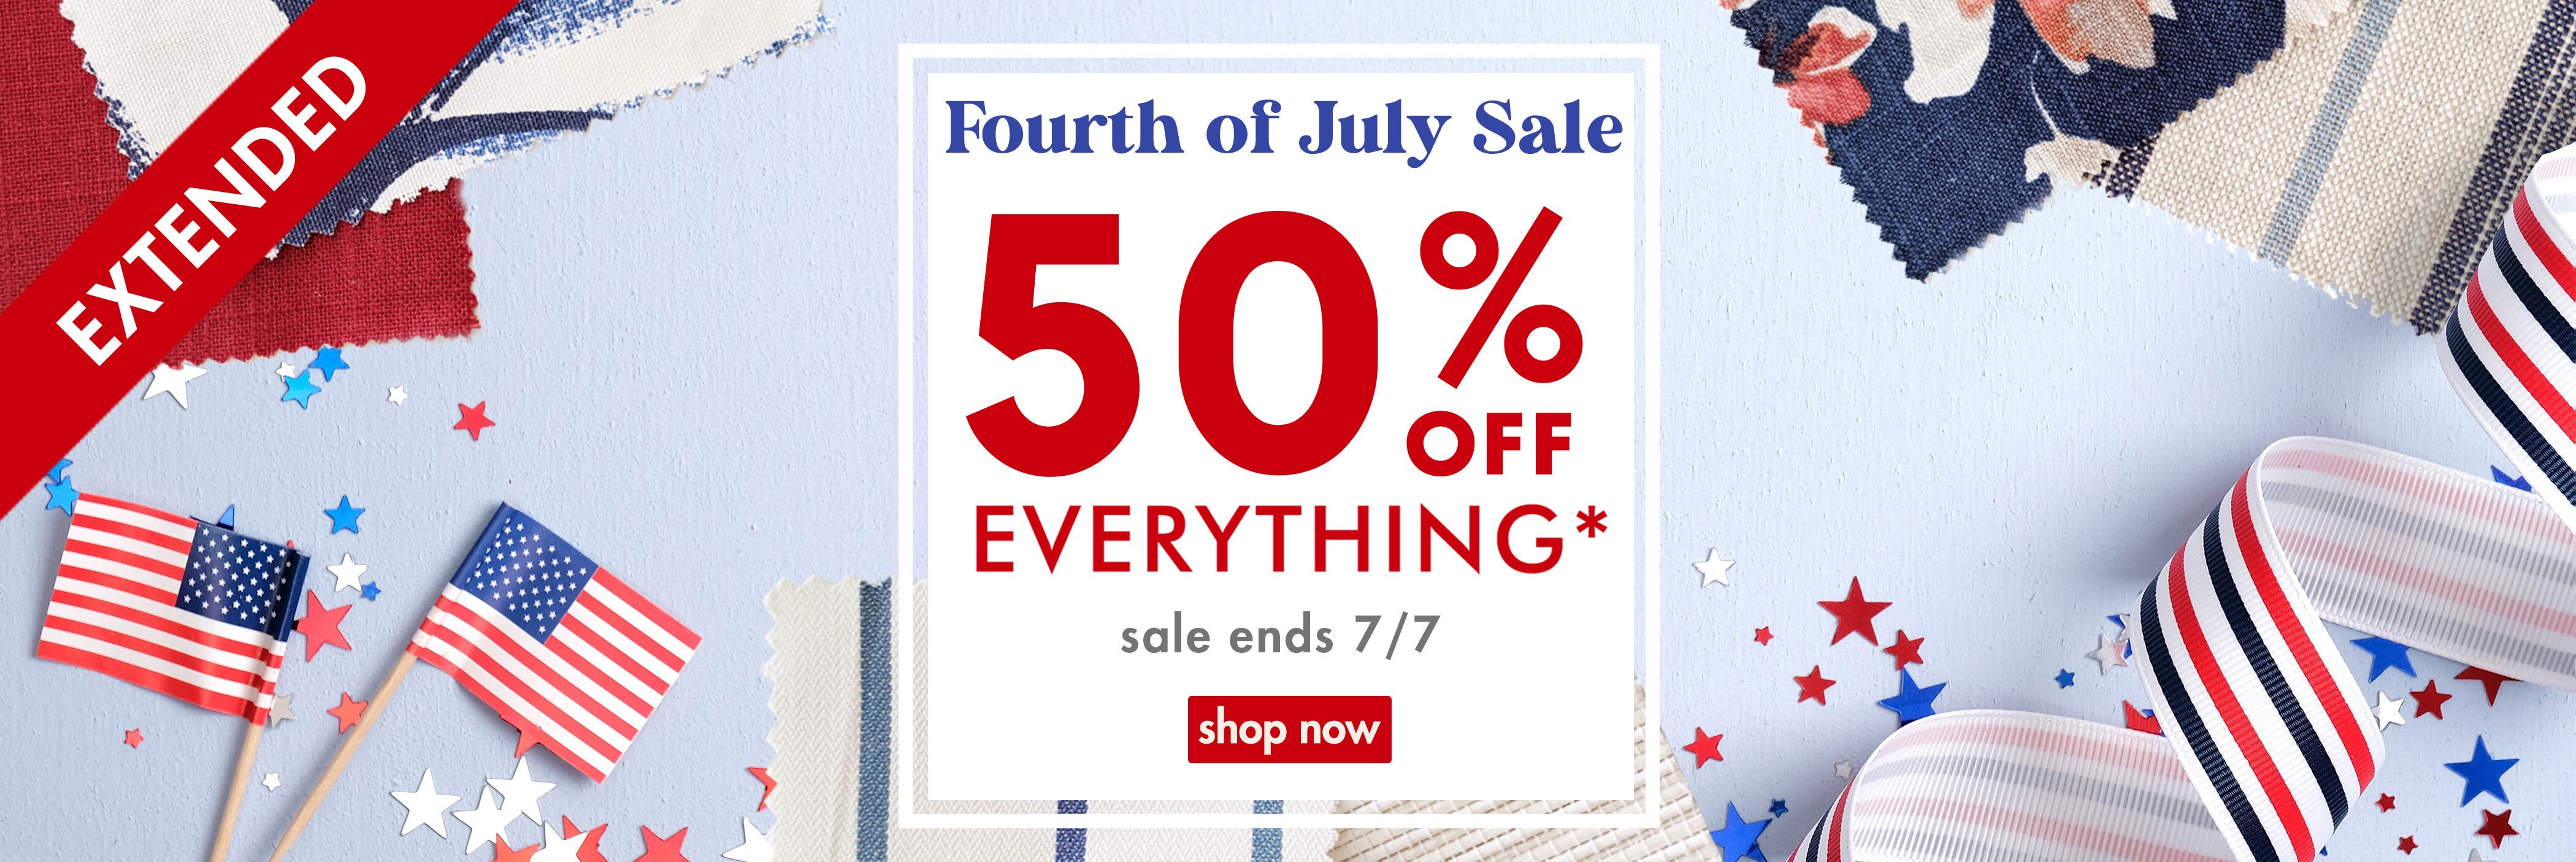 celebrate the fourth of july with up to 50% off everything